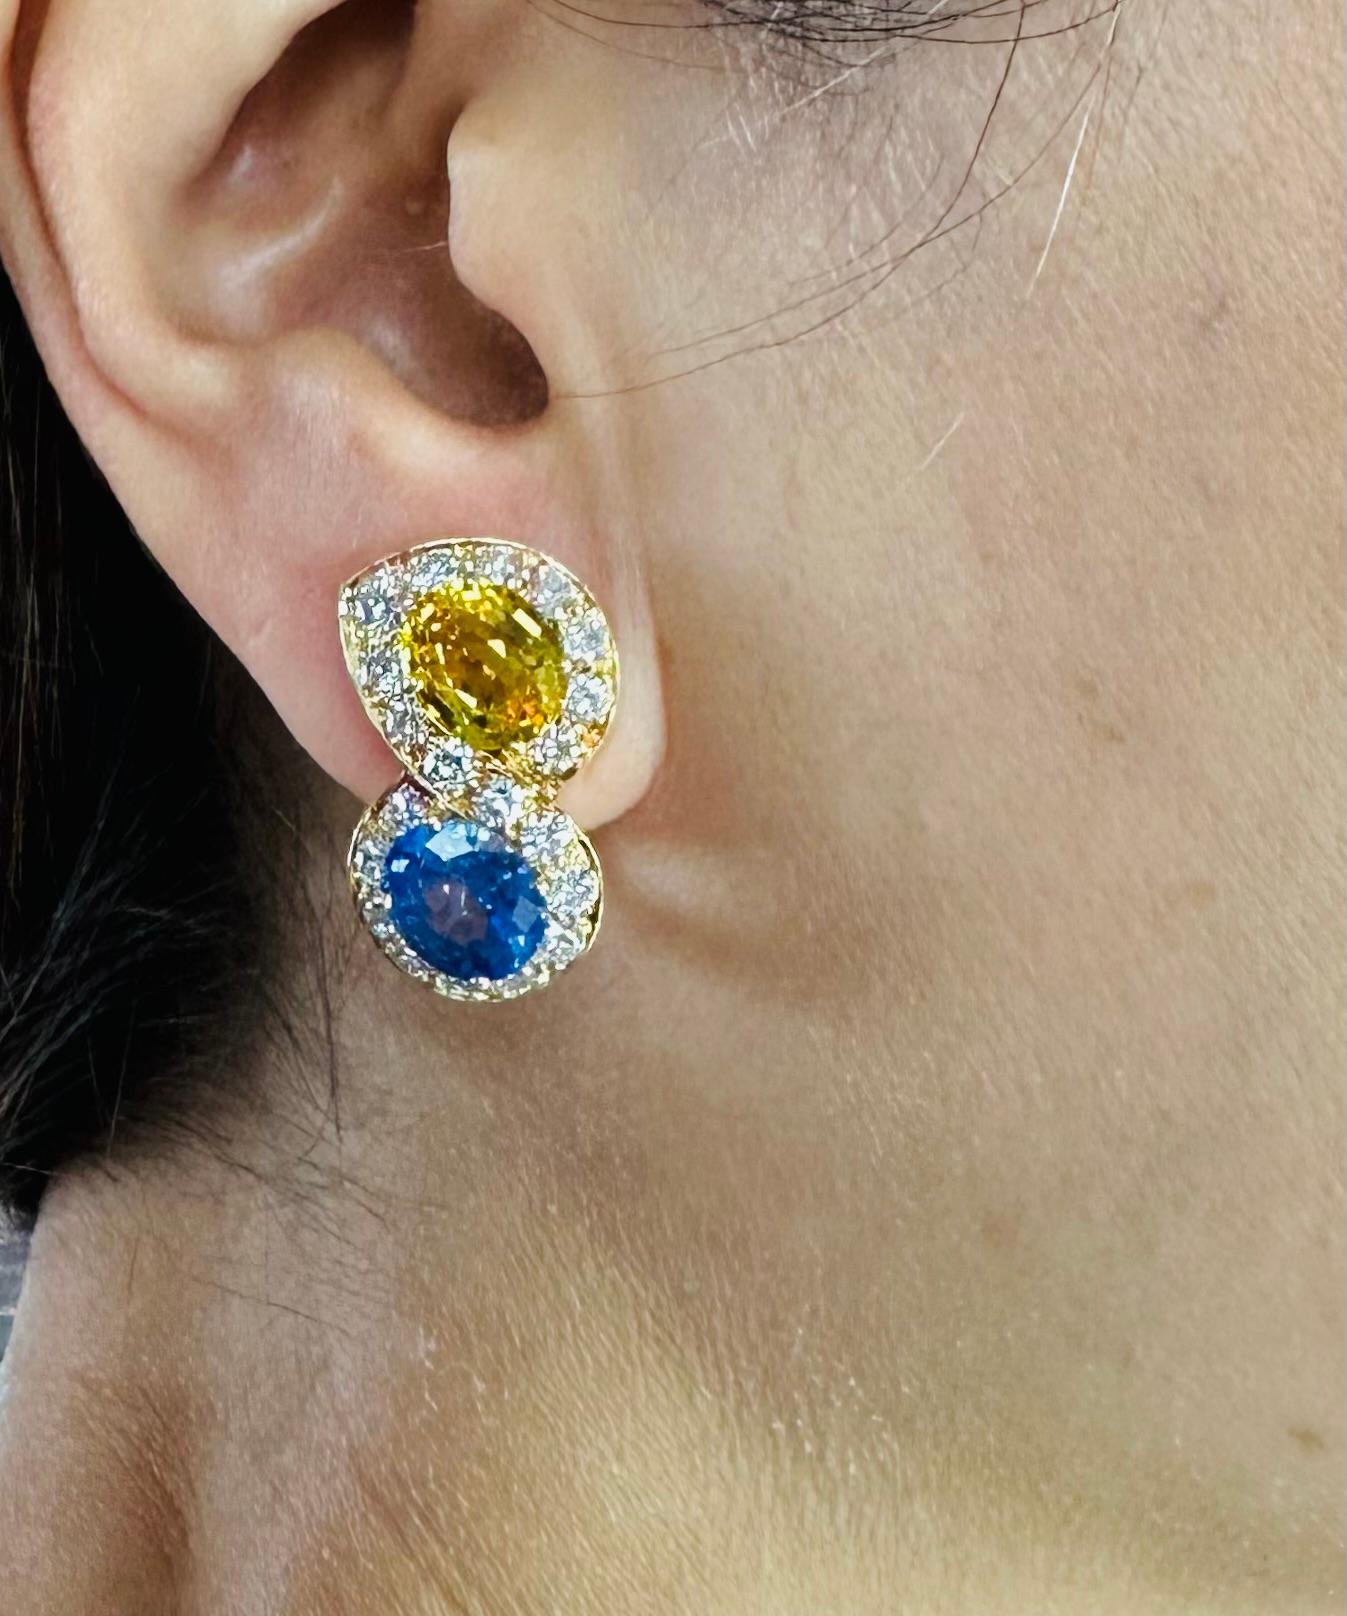 Important Van Cleef & Arpels Sapphire & Diamond  Earrings Set in 18k Yellow Gold.
Two Natural Blue Sapphires
Origin: Sir Lanka
Heating: None
Gia Report 22218409xx March 2023
Each sapphires measurement: 8.93 x 7.55 x 5.12
Estimated Weight: 2.75 cts